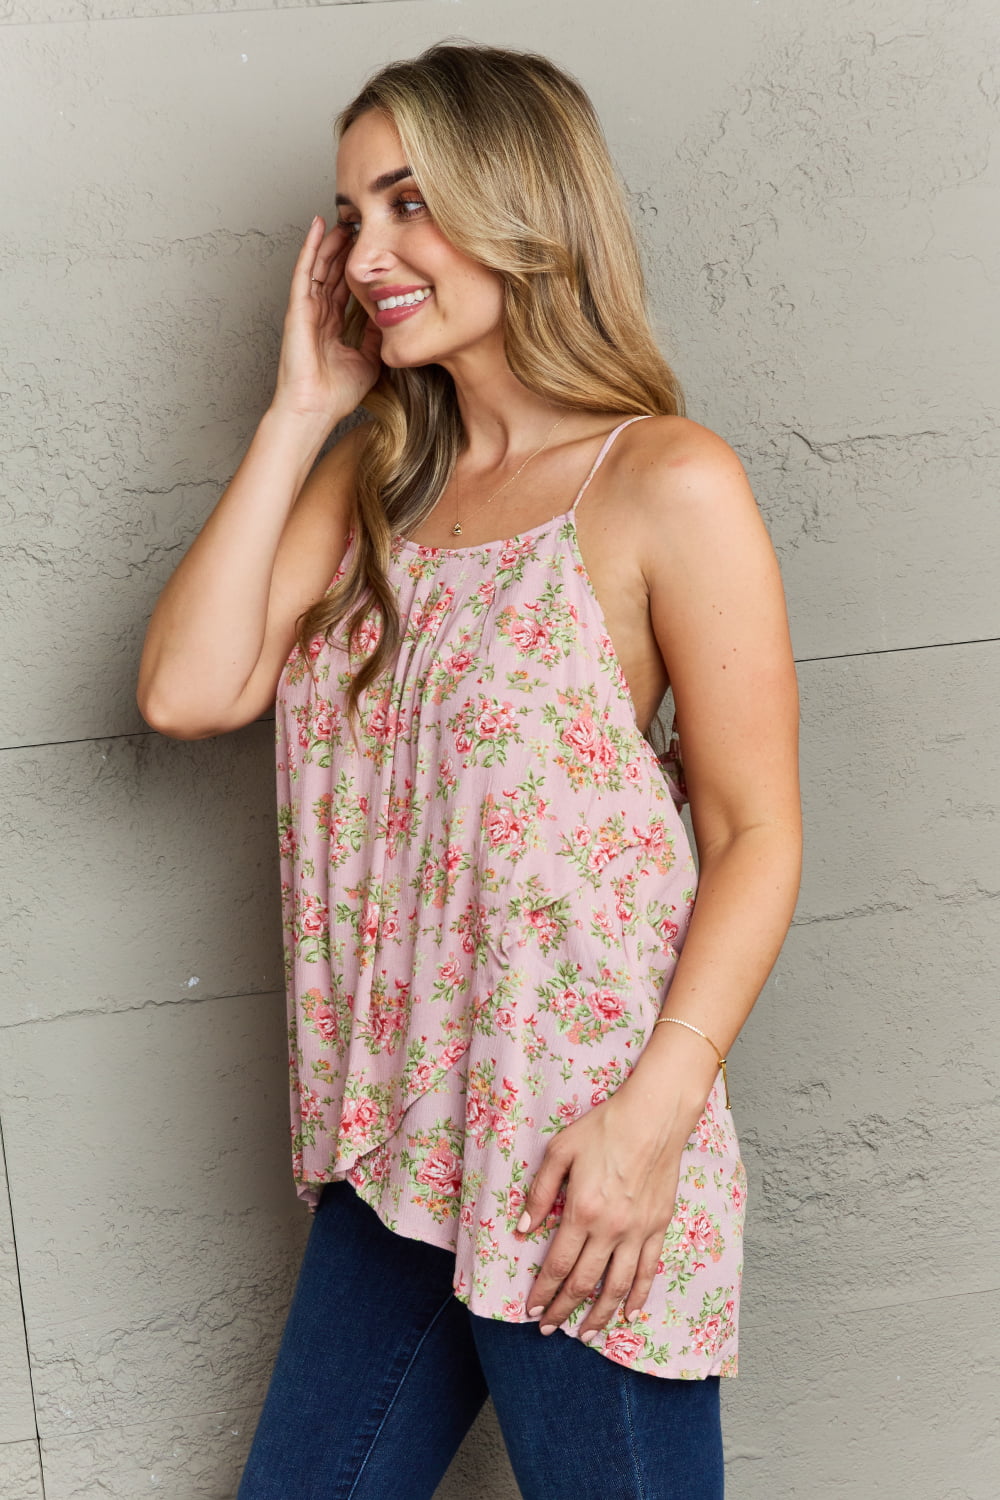 Hang Loose Tulip Hem Cami Top in Mauve Floral - Women’s Clothing & Accessories - Shirts & Tops - 3 - 2024